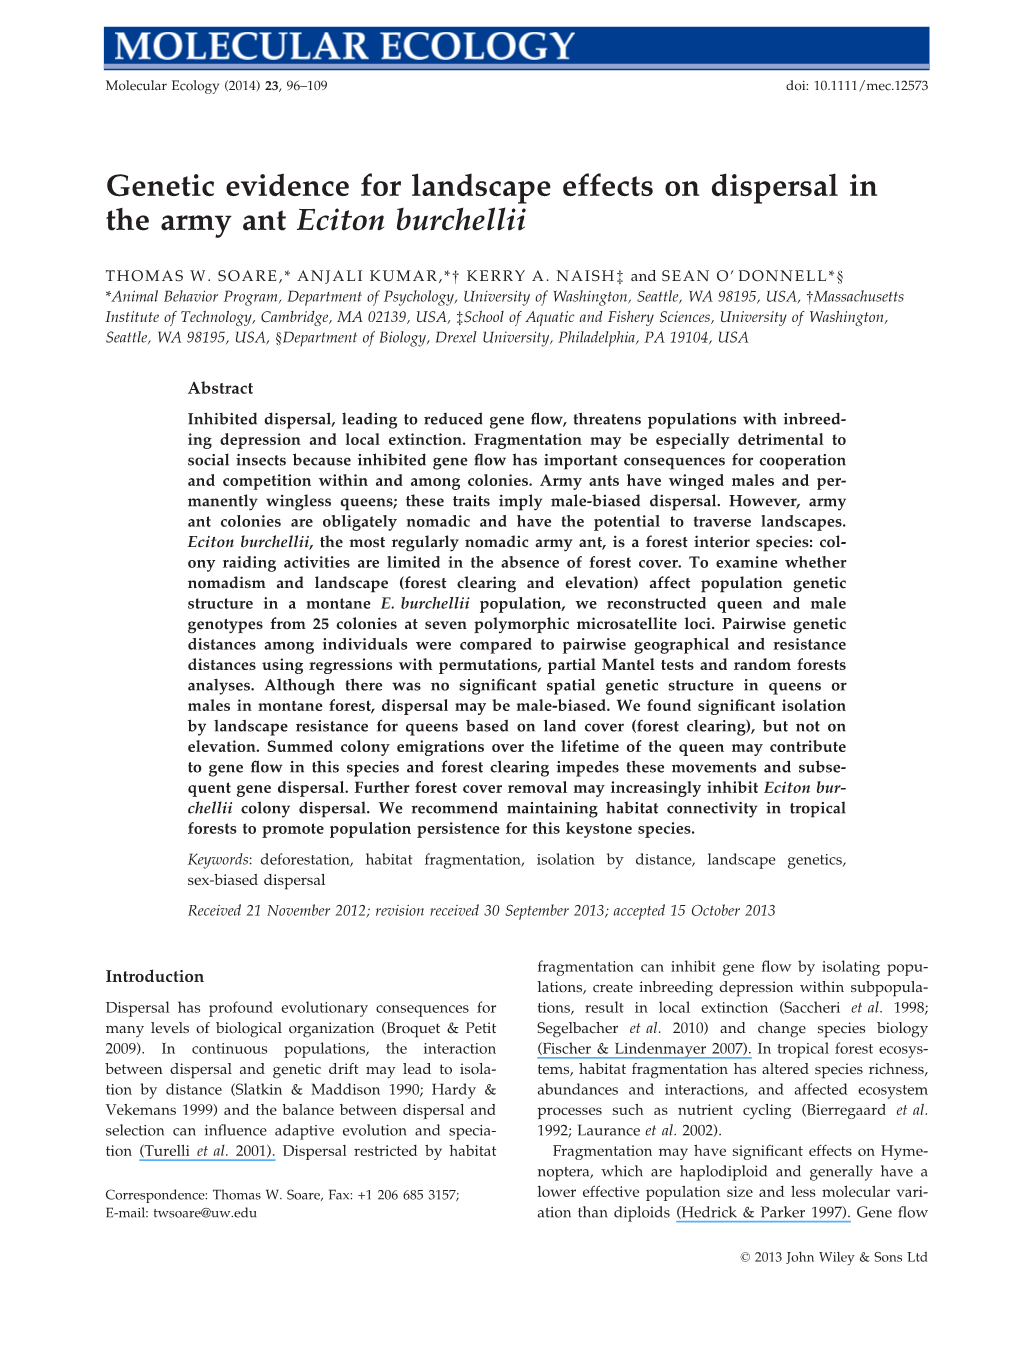 Genetic Evidence for Landscape Effects on Dispersal in the Army Ant Eciton Burchellii